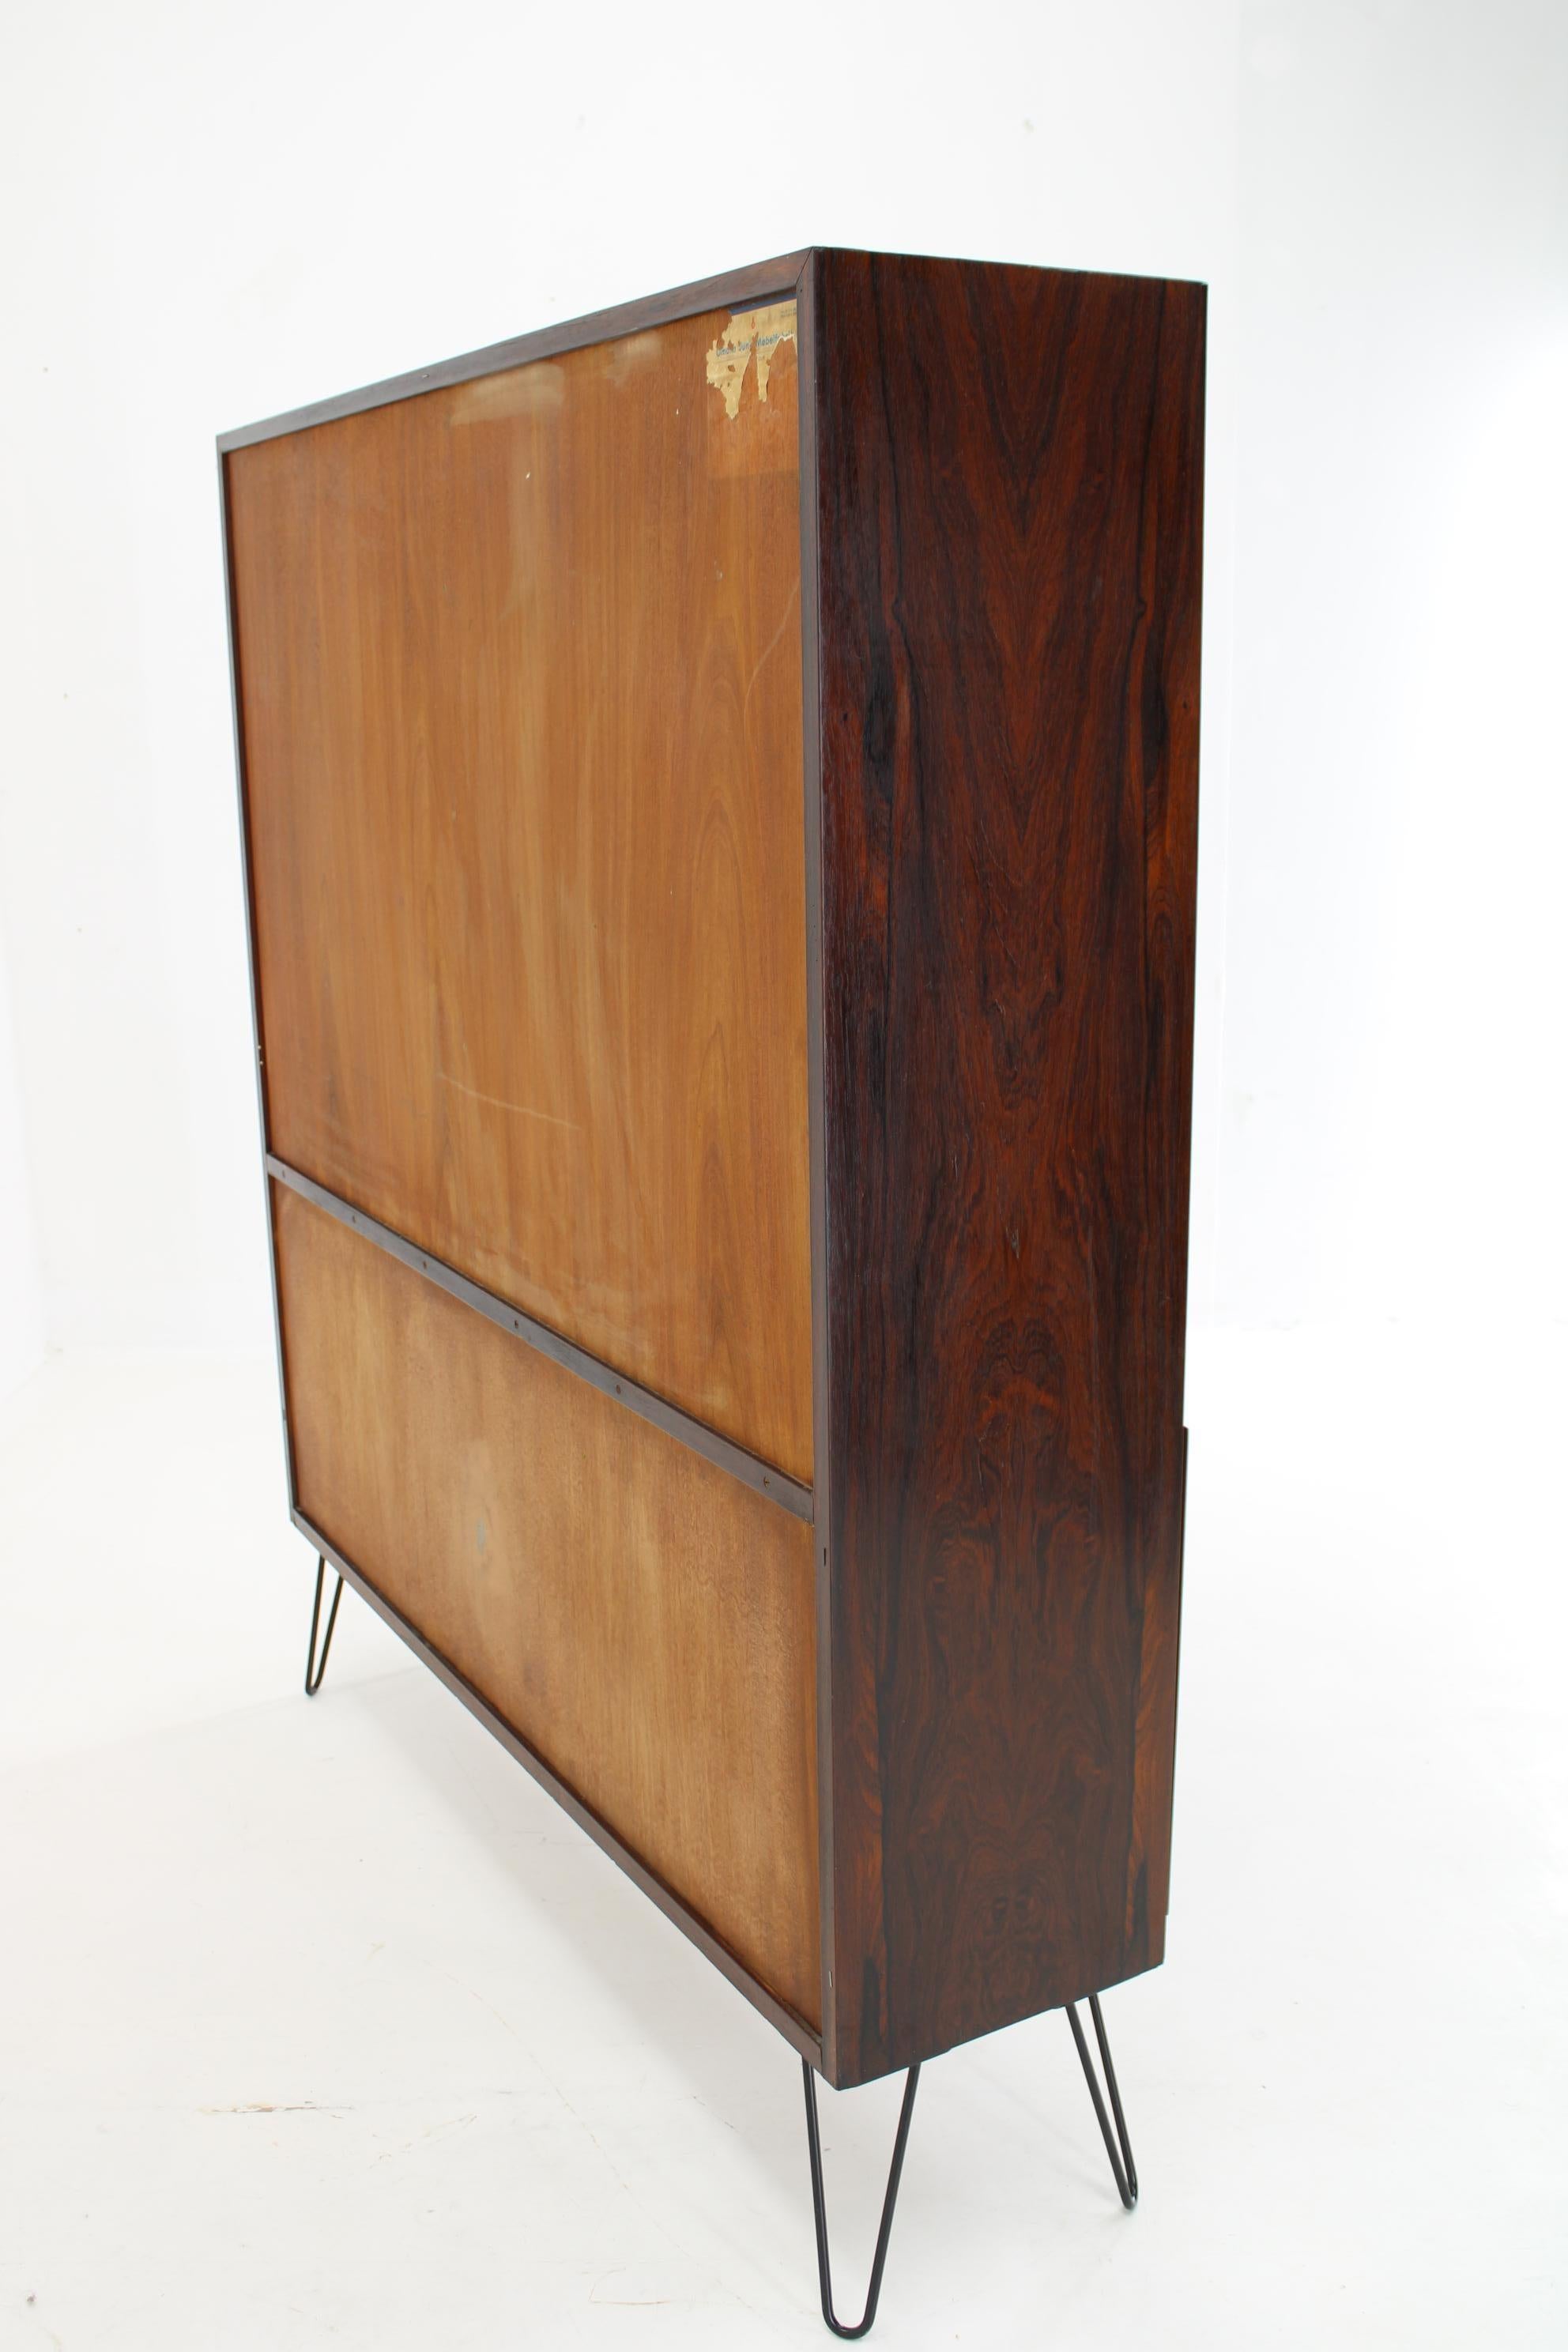 1960s Omann Jun Upcycled Bookcase Cabinet, Denmark  For Sale 9